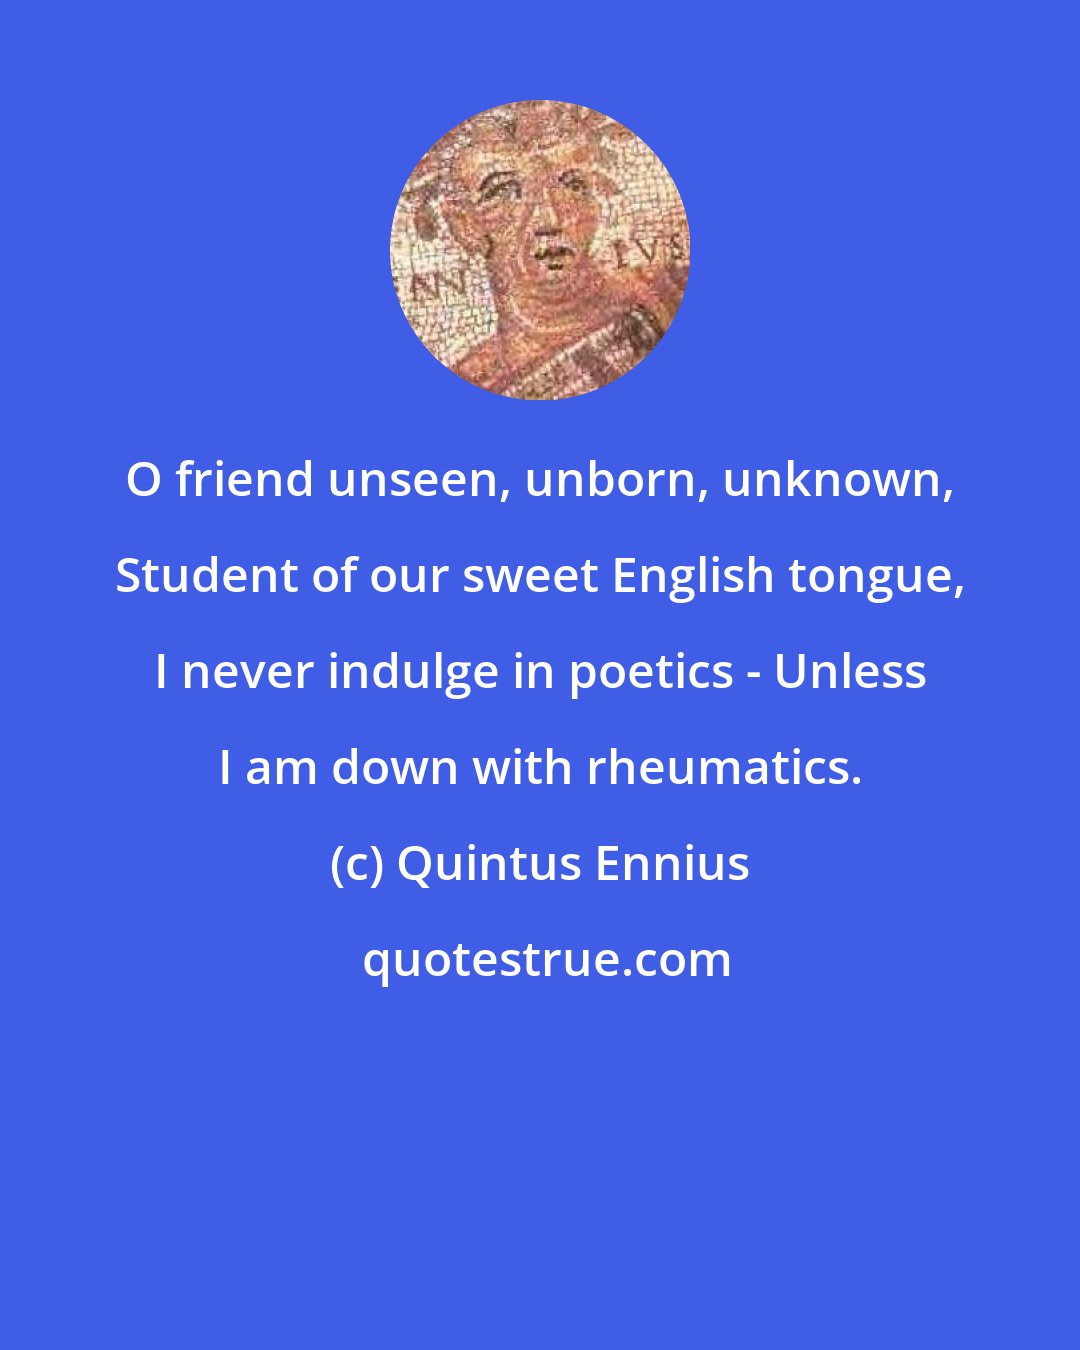 Quintus Ennius: O friend unseen, unborn, unknown, Student of our sweet English tongue, I never indulge in poetics - Unless I am down with rheumatics.